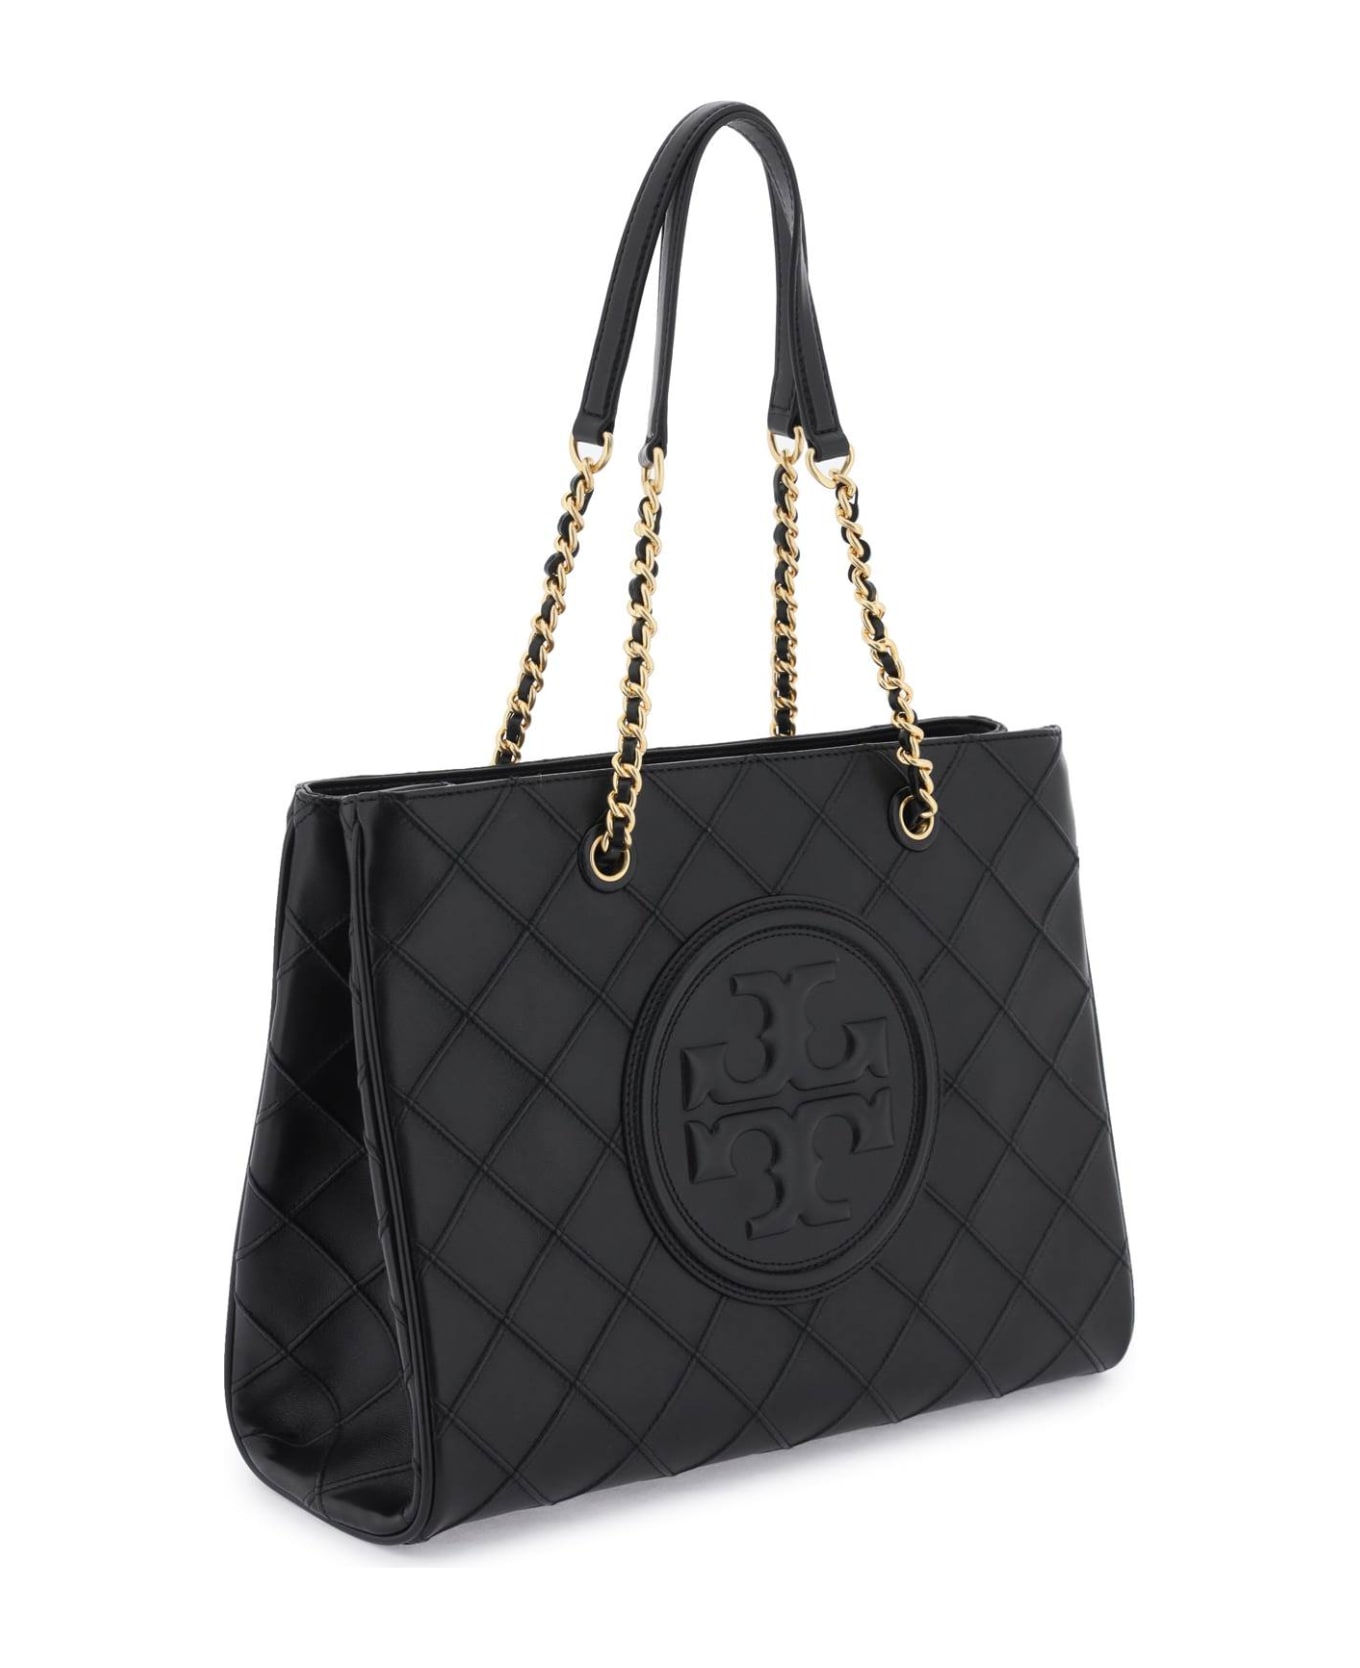 Tory Burch 'fleming Soft' Quilted Black Leather Bag - Black トートバッグ